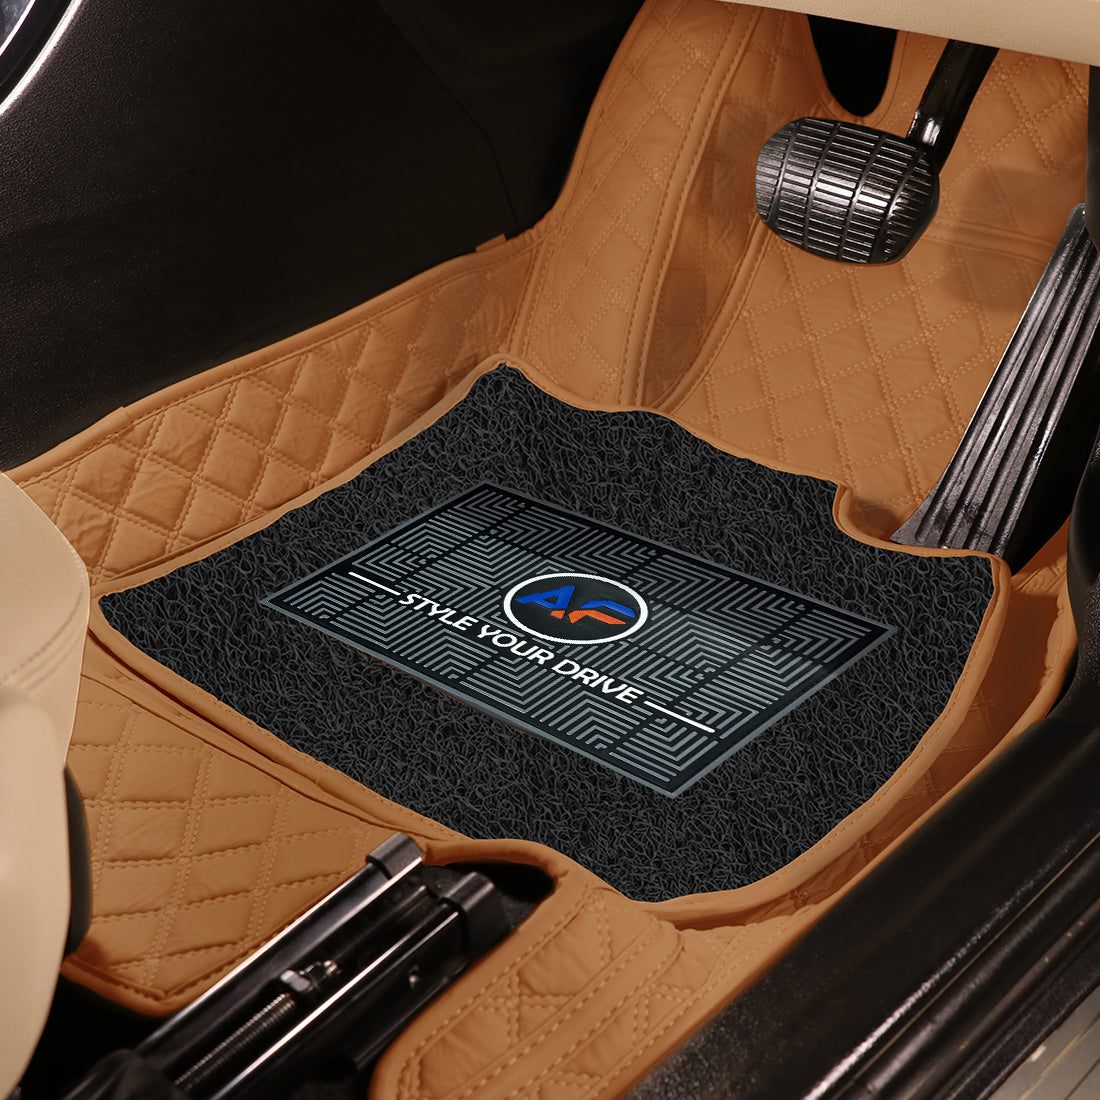 Mercedes GLC 300 2023-7D Luxury Car Mat, All Weather Proof, Anti-Skid, 100% Waterproof & Odorless with Unique Diamond Fish Design (24mm Luxury PU Leather, 2 Rows)